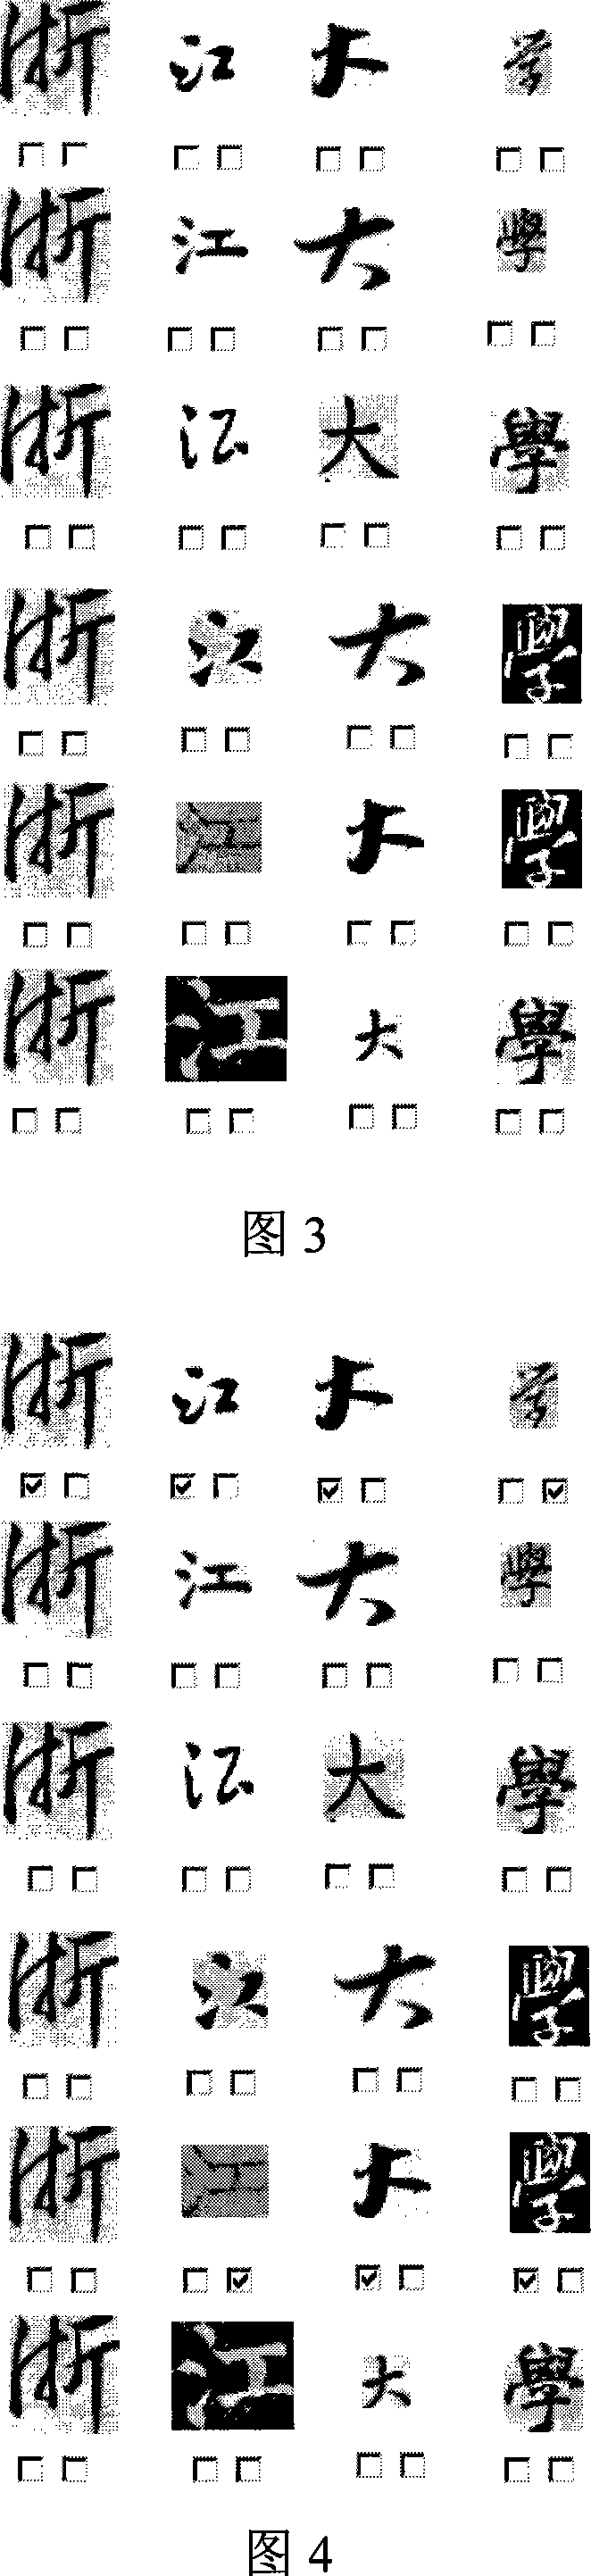 Computer aided calligraphy tablet design method